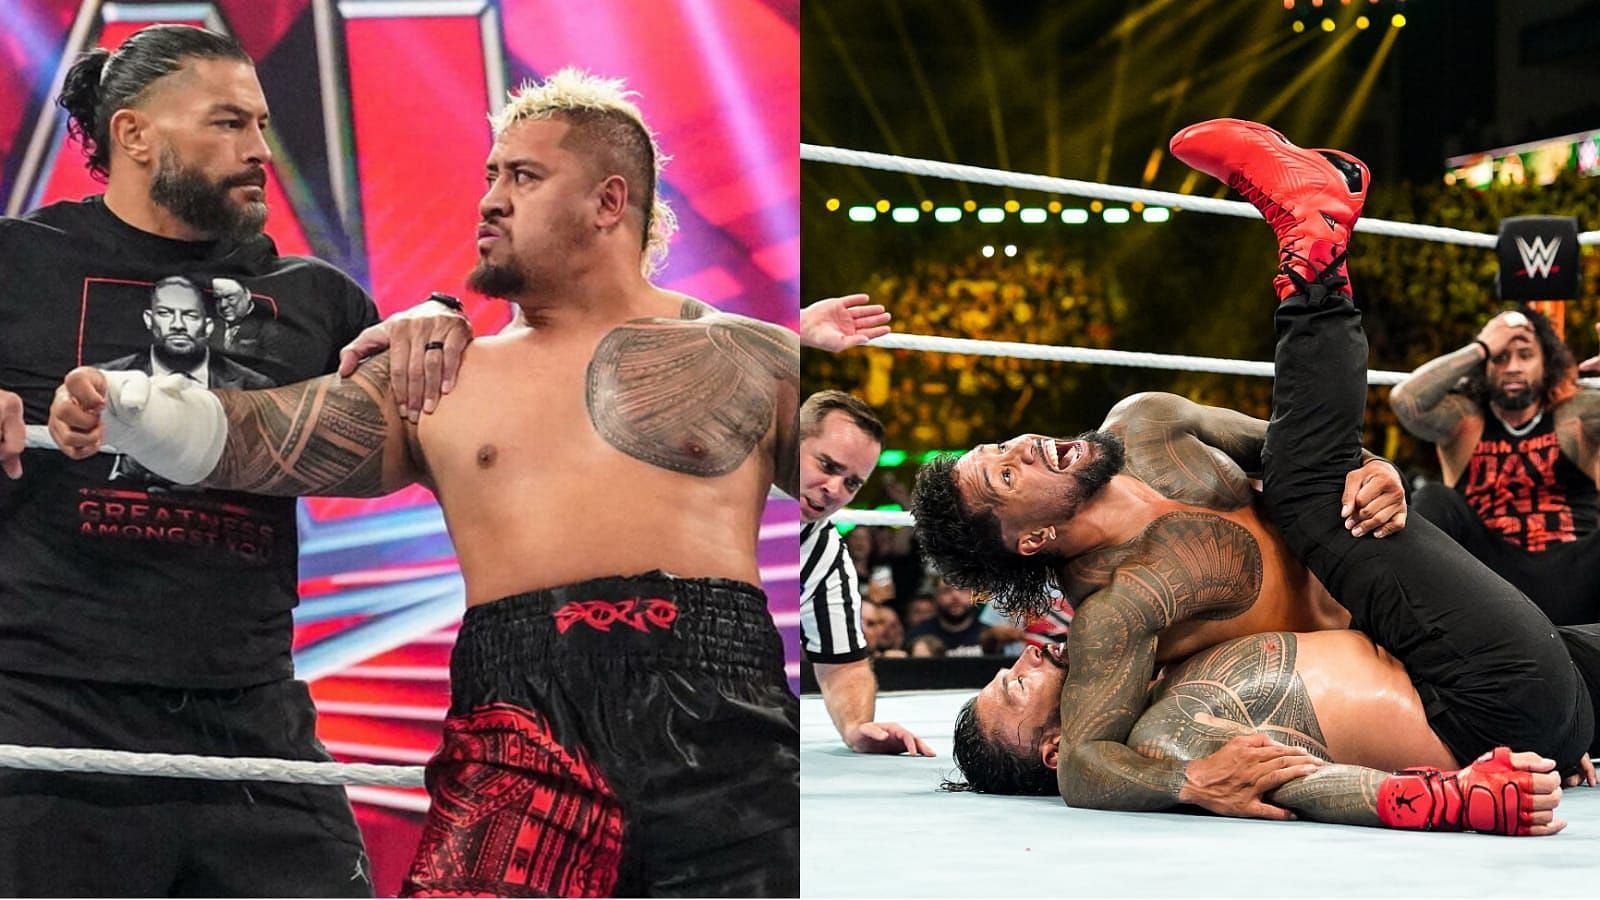 Solo Sikoa was on the losing end of his match at WWE Money in the Bank!